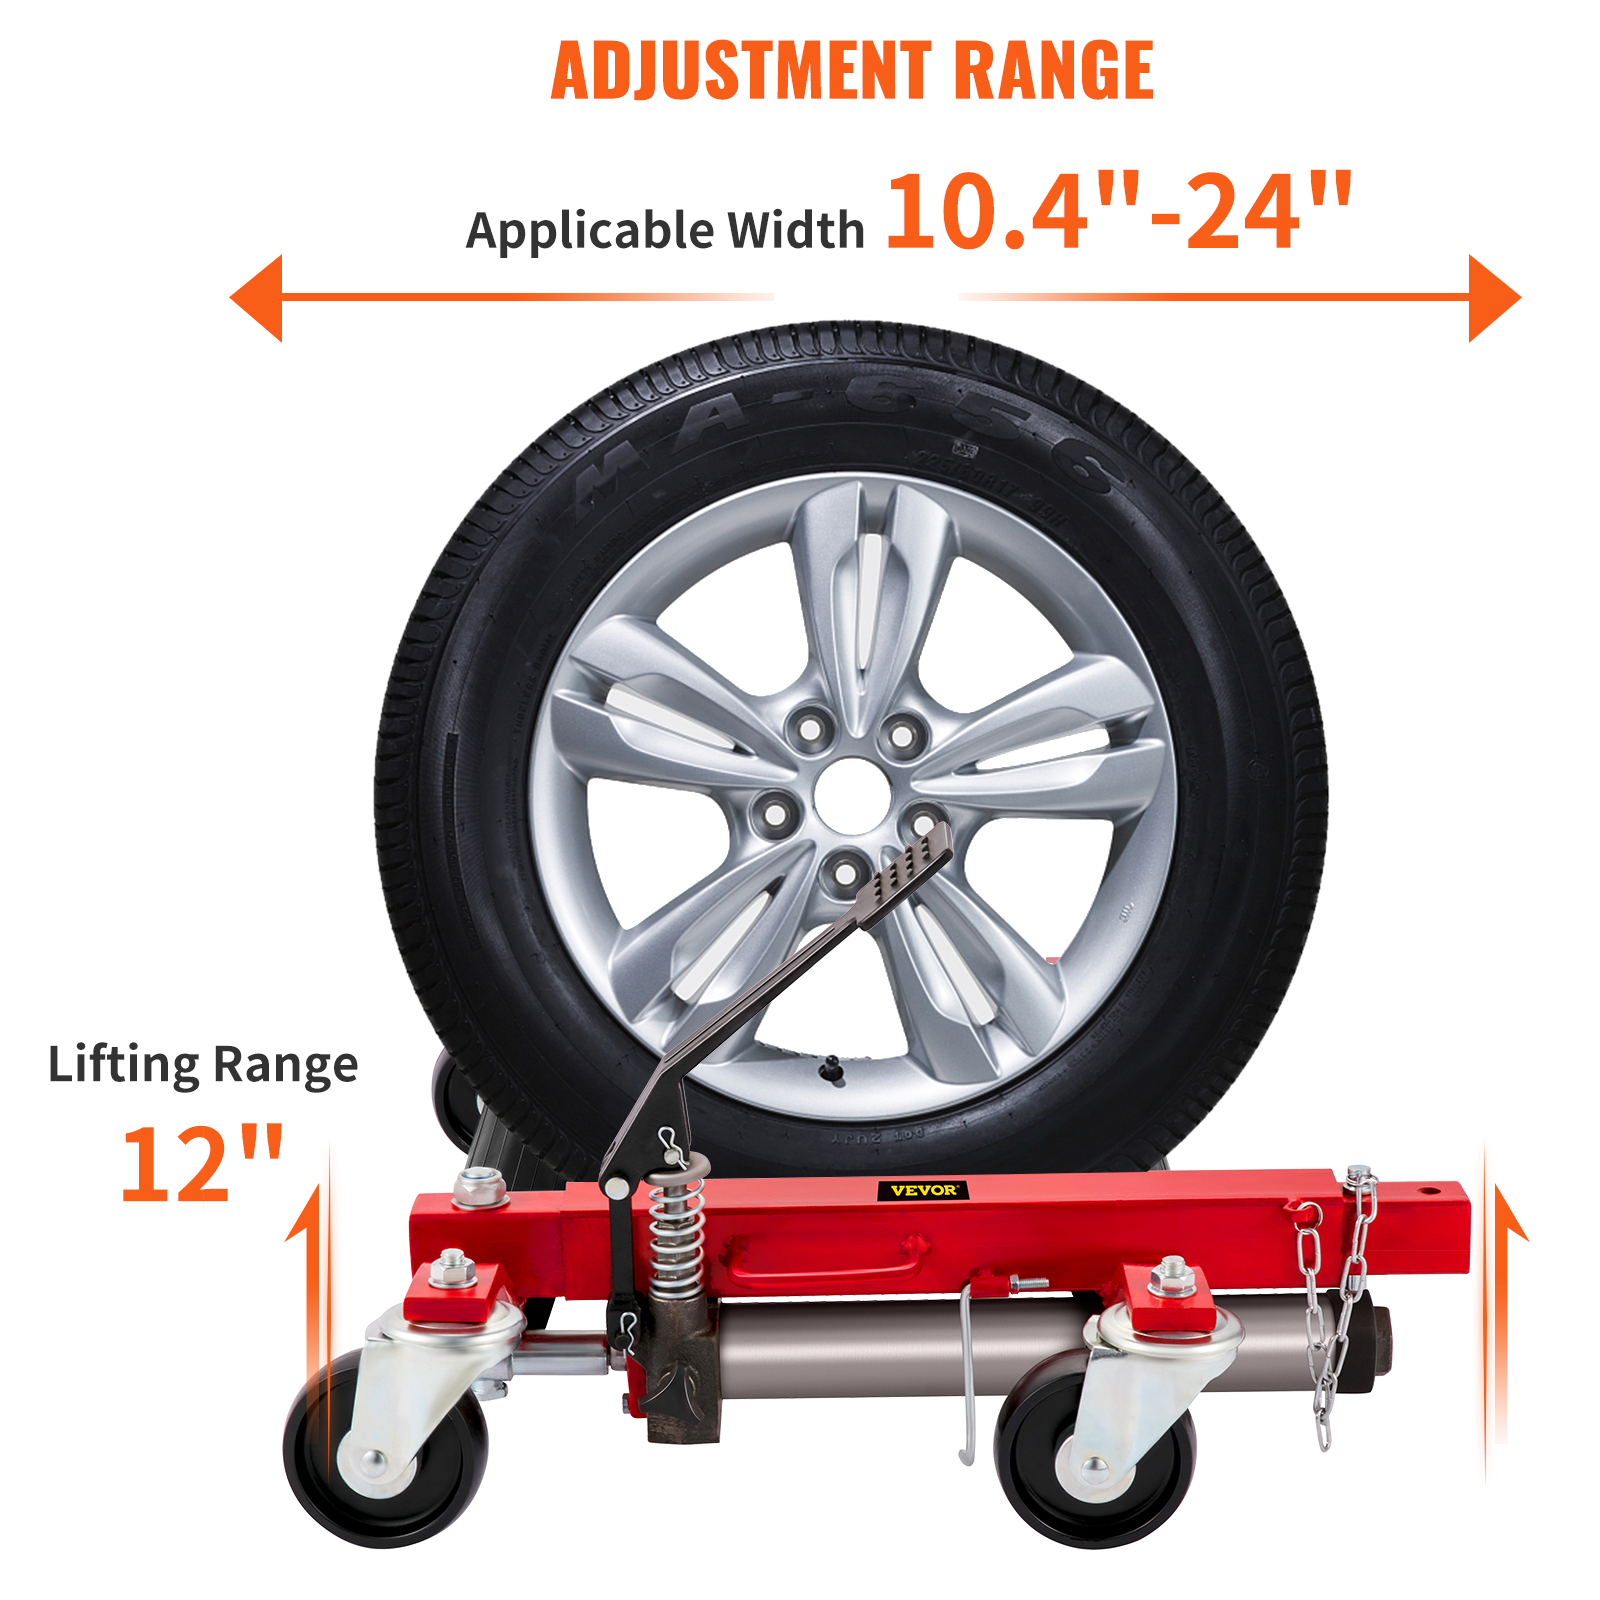 VEVOR VEVOR Hydraulic Wheel Dolly 1500 lbs / 680 kg*1 pcs, Car Skate  Vehicle Positioning Jack Foot Pump Hydraulic Tyre Lift Roller Dolly Hoist  (Tyre Width 12inches, 4 double-bearing universal casters) Car